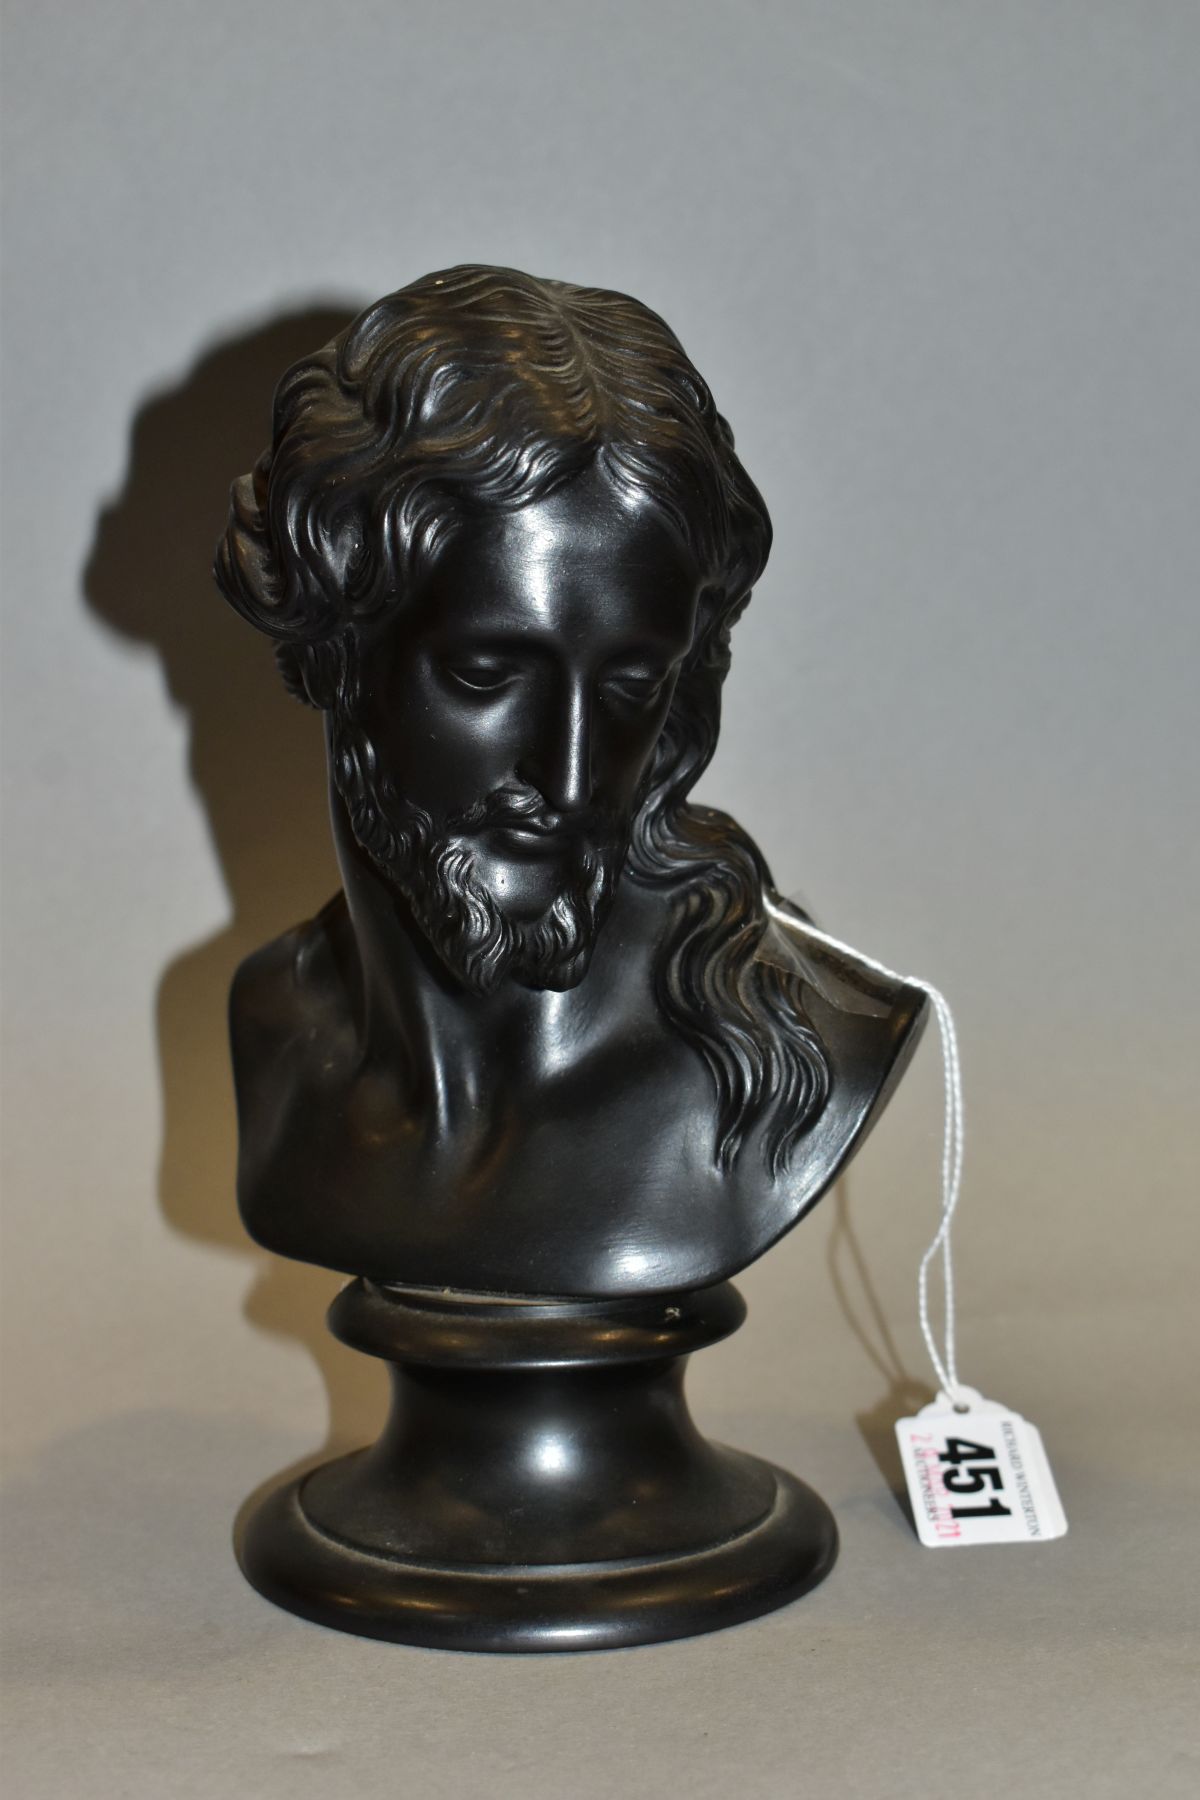 A LATE 19TH CENTURY WEDGWOOD BLACK BASALT BUST OF JESUS CHRIST, impressed marks to back of bust